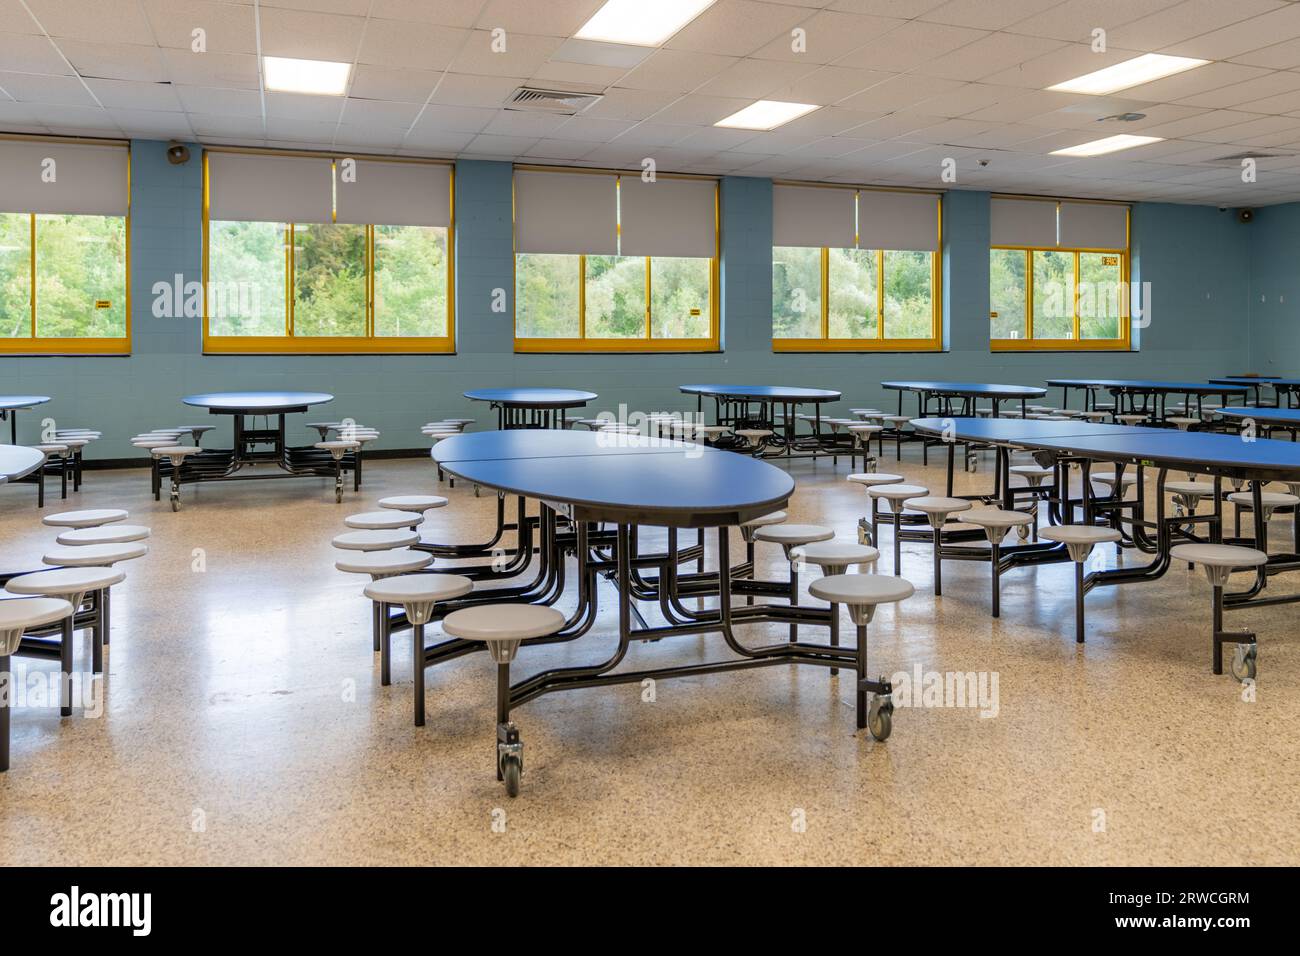 Blue folding table with attached seats in a school cafeteria. Stock Photo